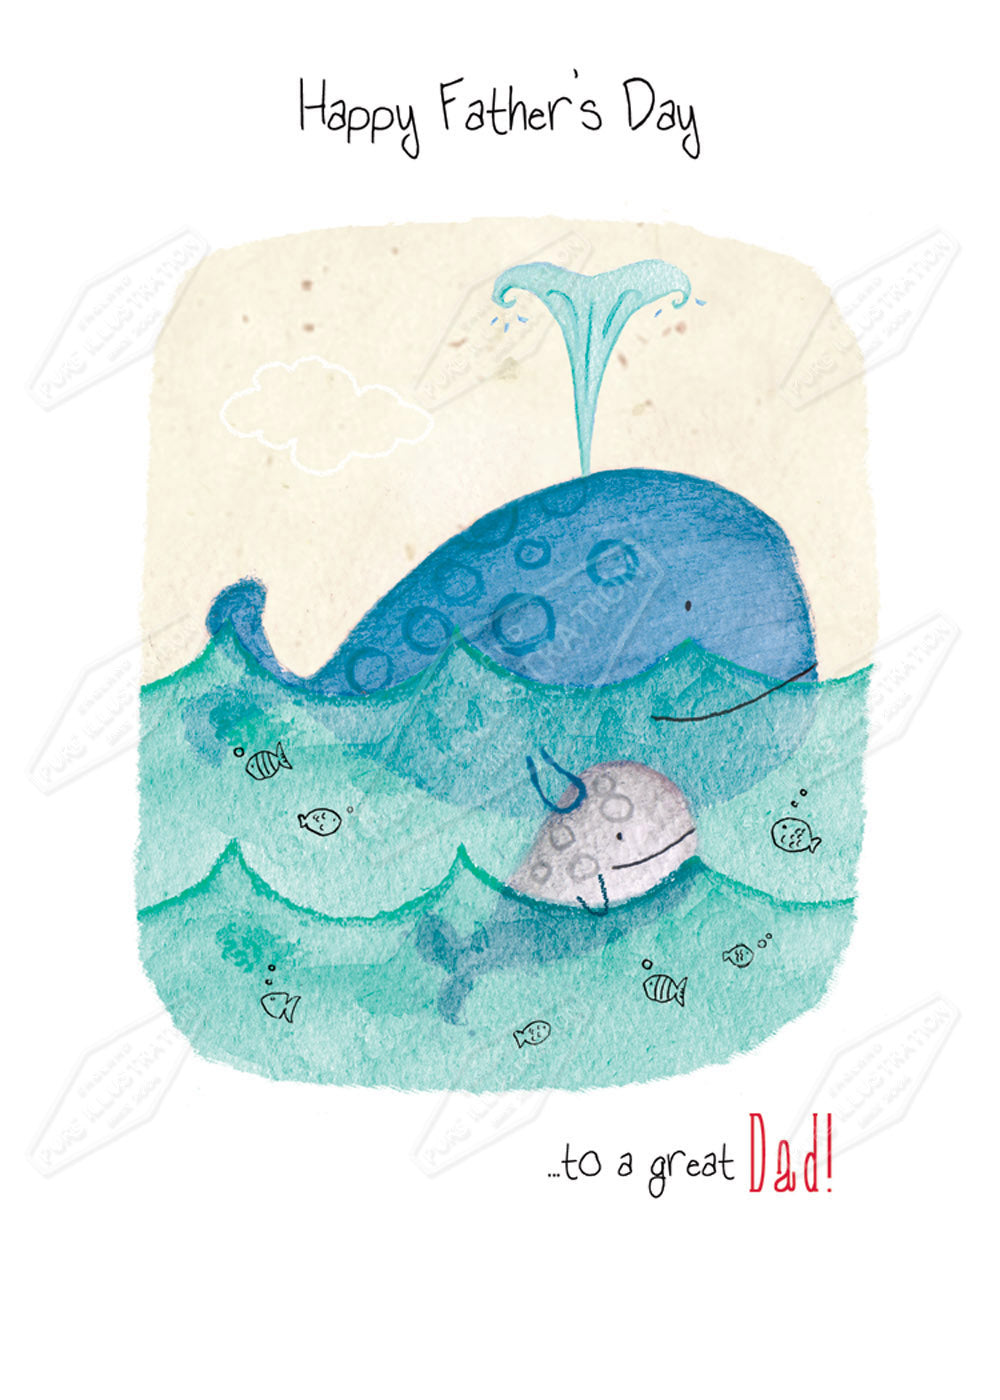 Father's Day Whales Greeting Card Design by Cory Reid for Pure Art Licensing Agency & Surface Design Studio